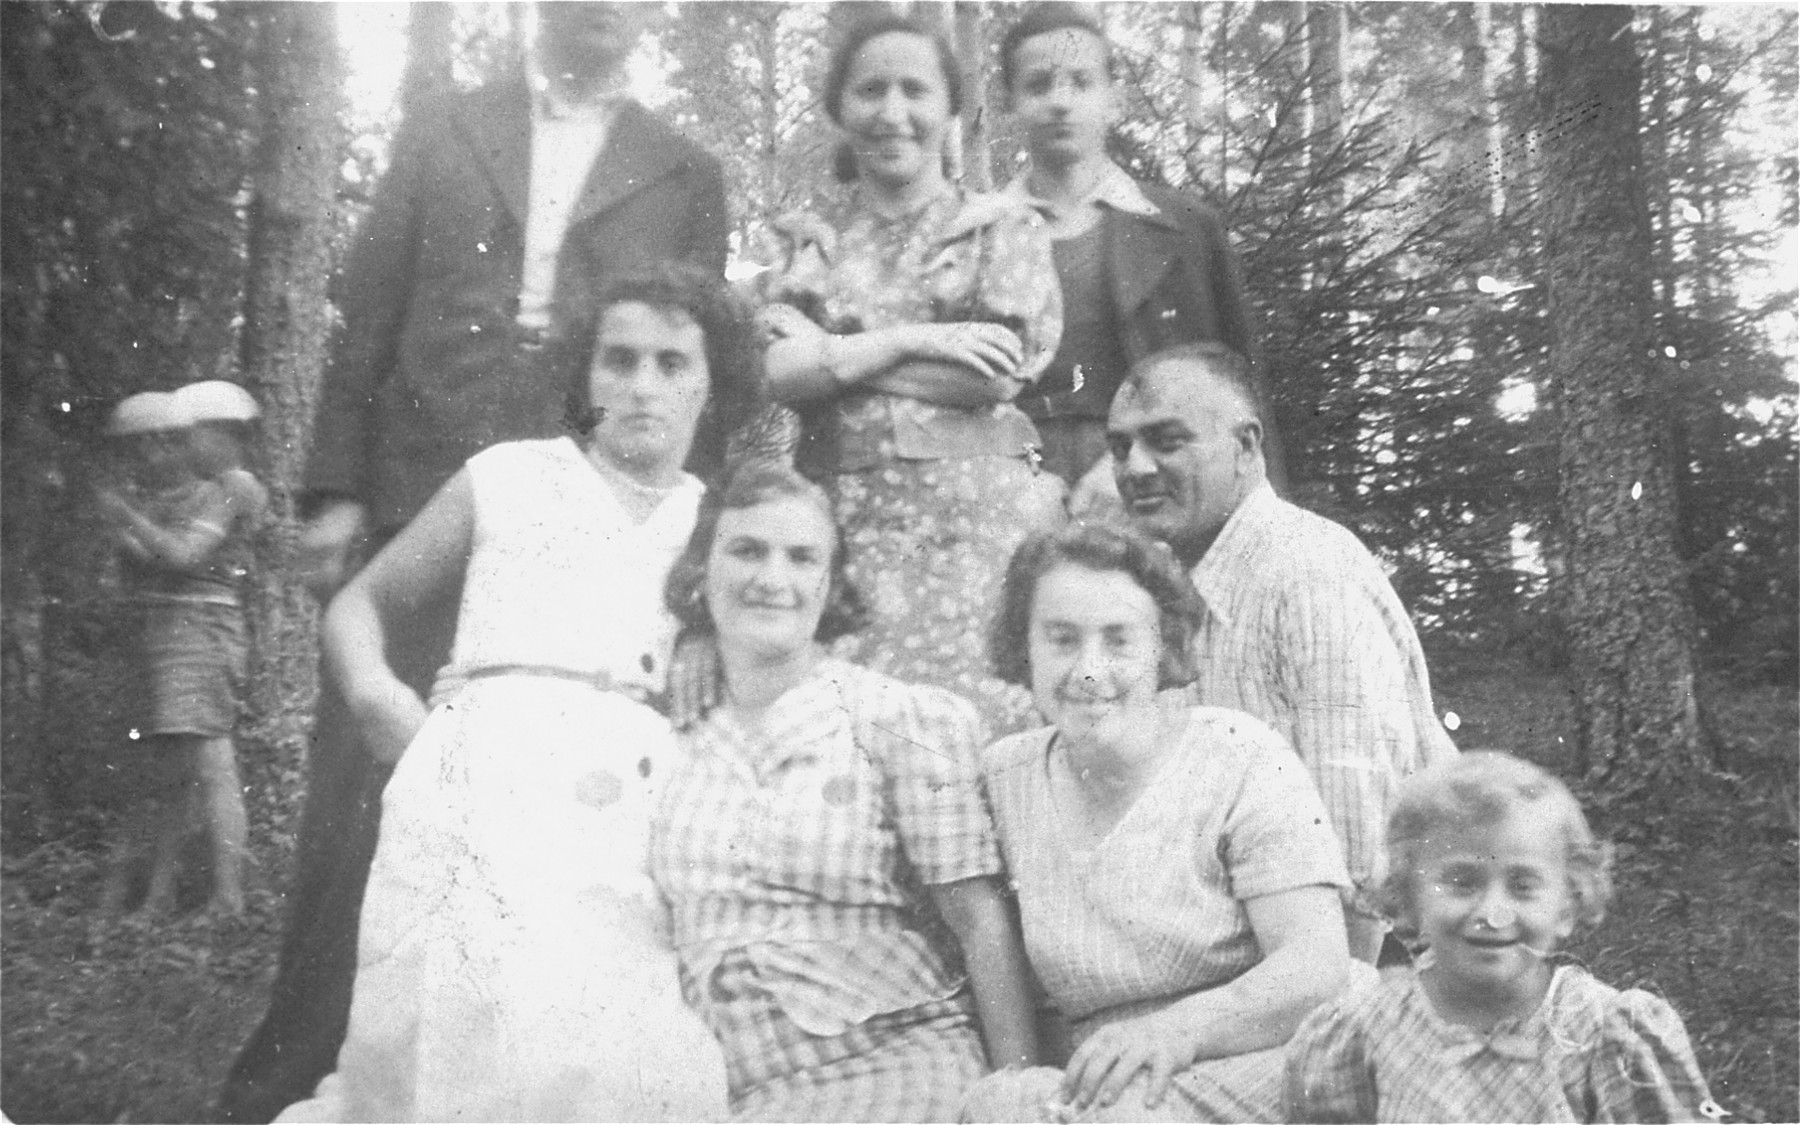 Friends and relatives of a Jewish family from Sejny pose for a group portrait in the woods.

Pictured are relatives of the Szczupacki family.